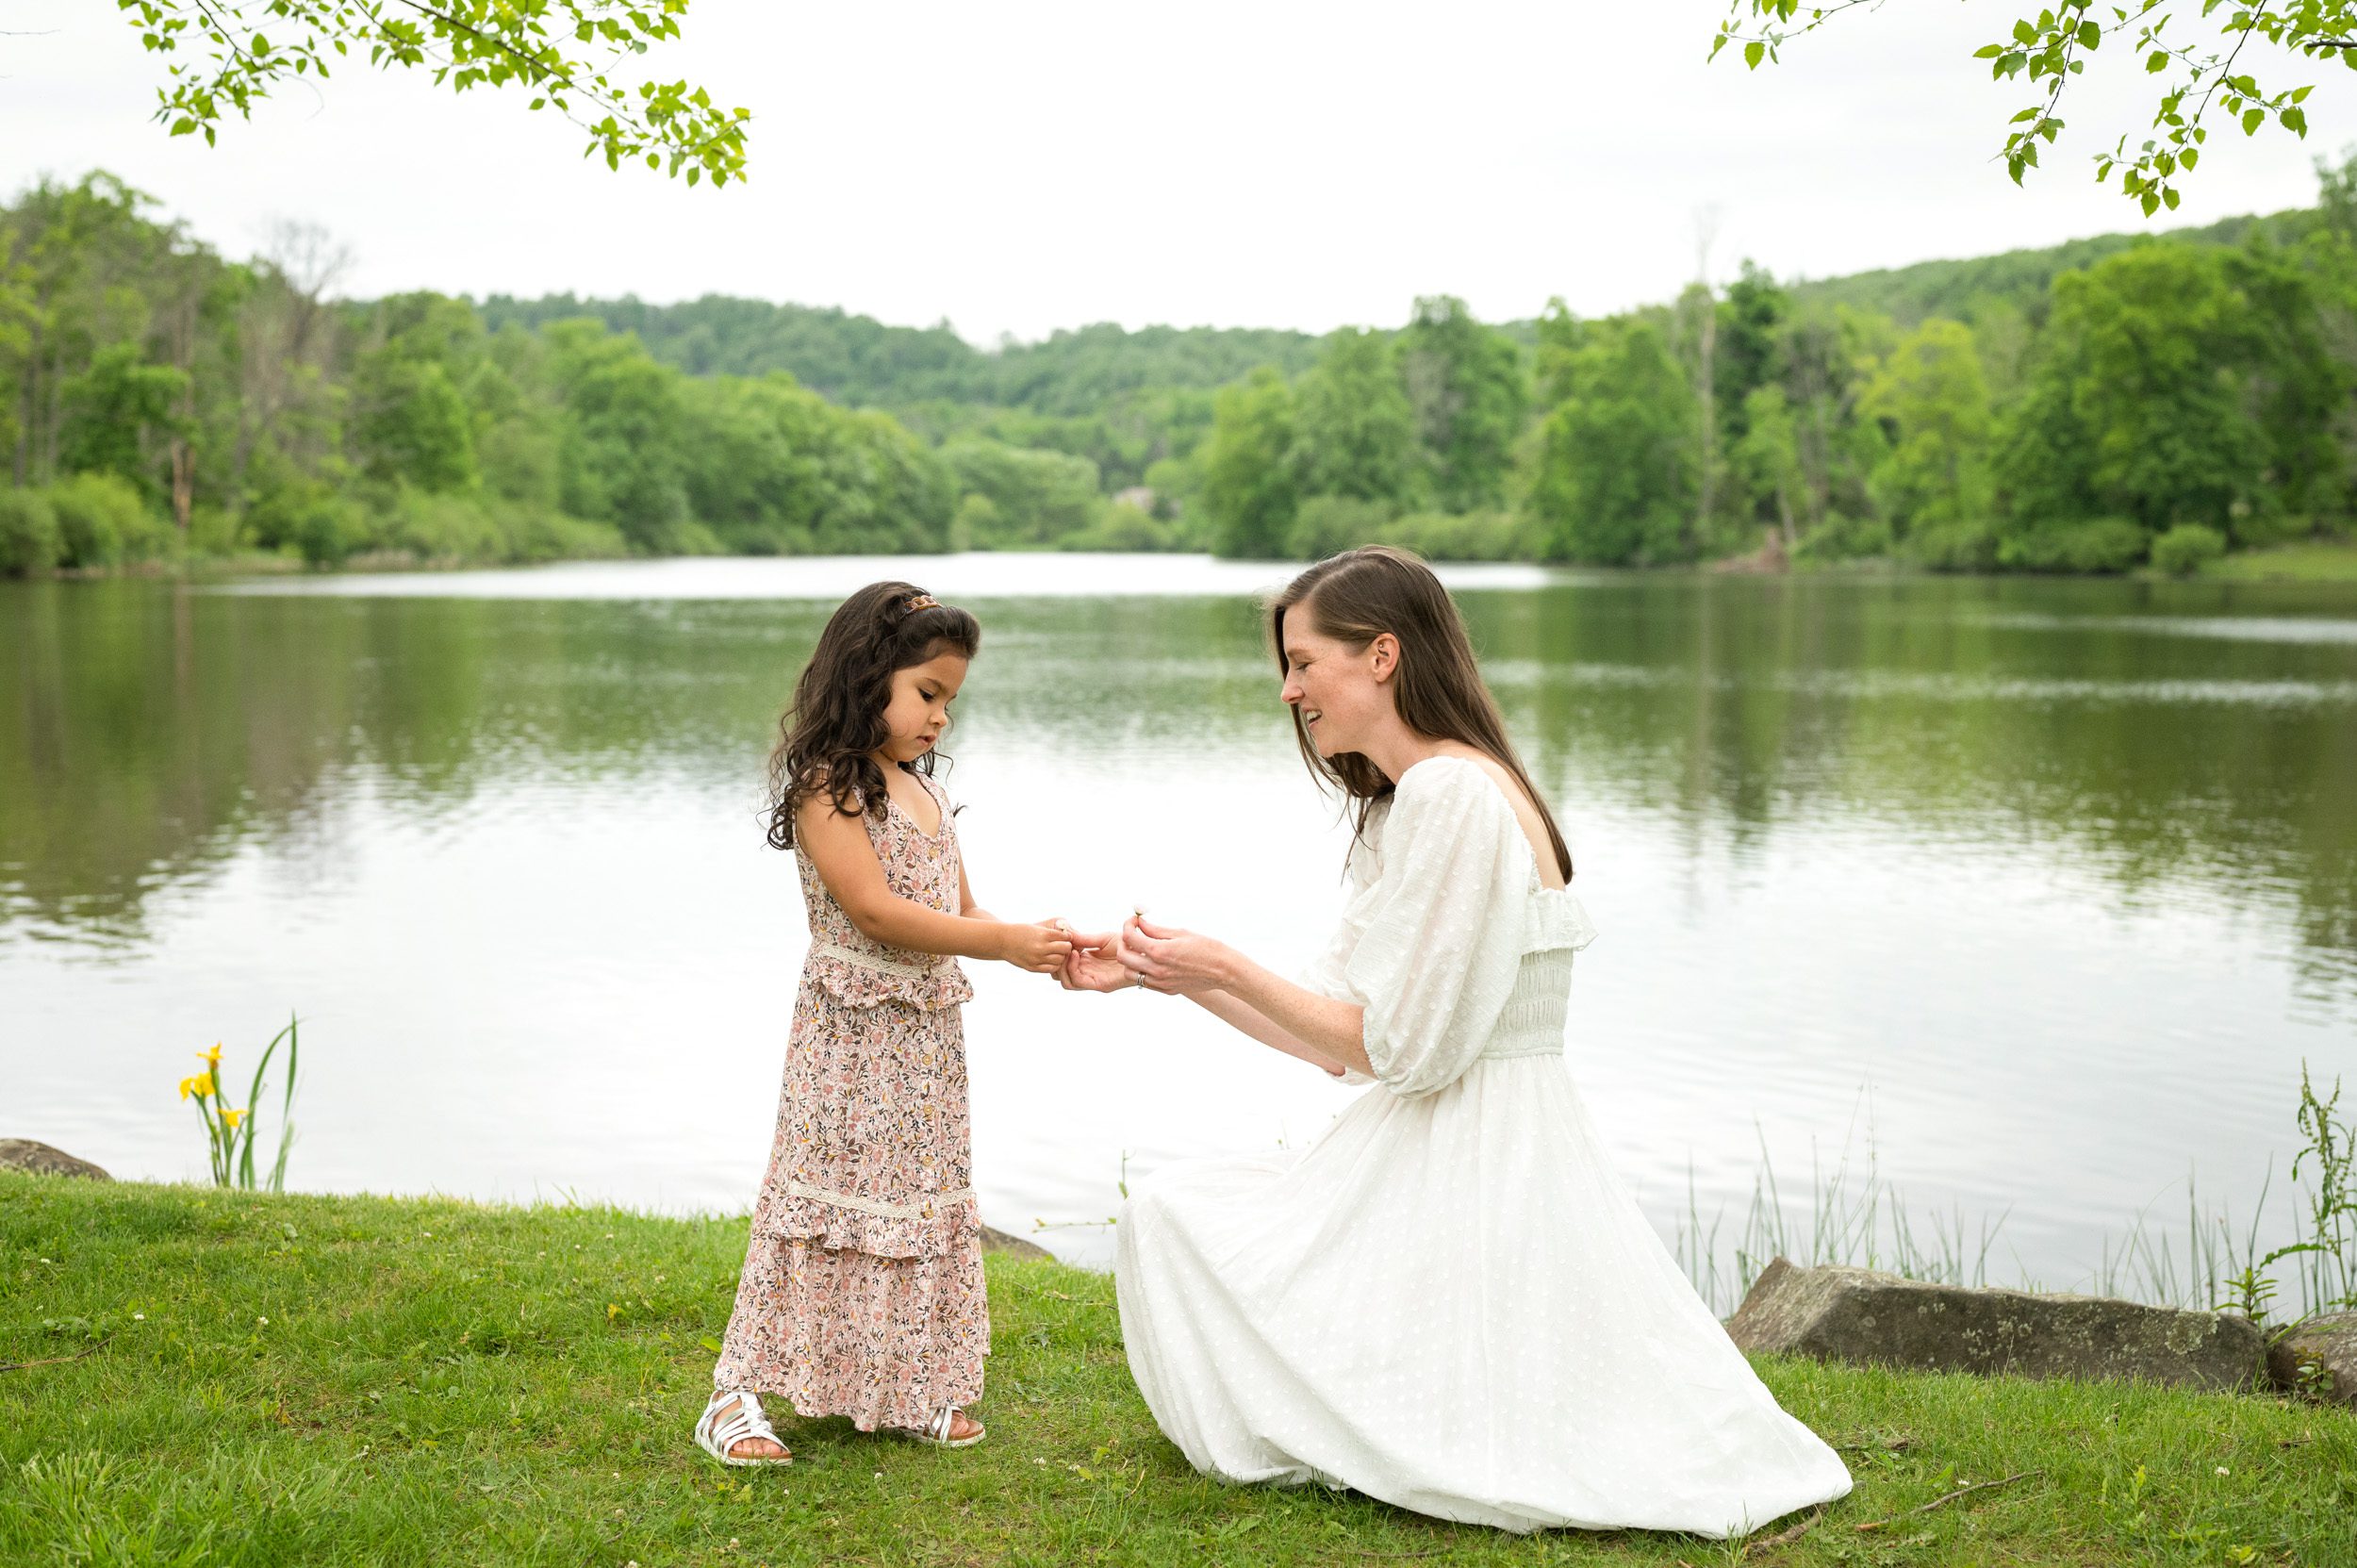 A young girl handing her mom a flower during a pottstown family photo session